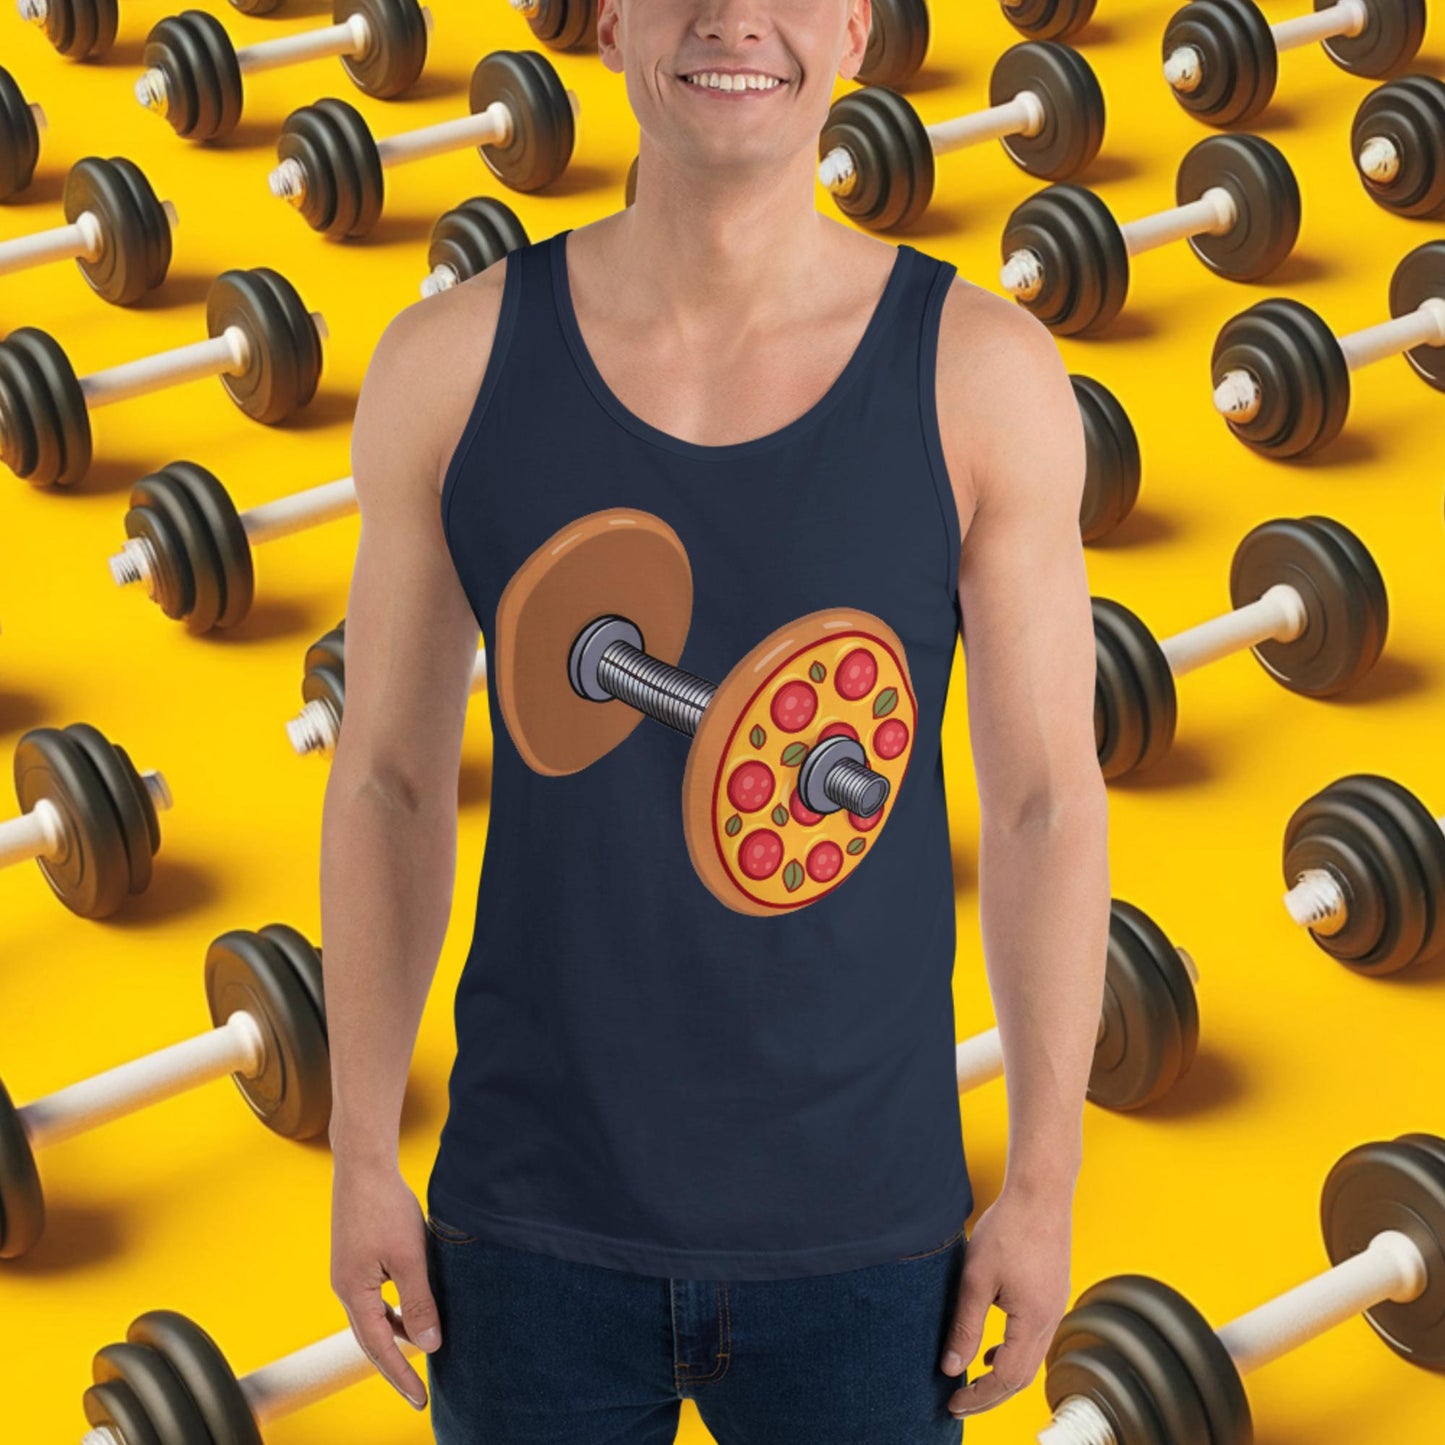 Pizza Dumbbell Barbell Funny Bulk Diet Gym Workout Fitness Weight Lifting Bodybuilding Tank Top Next Cult Brand